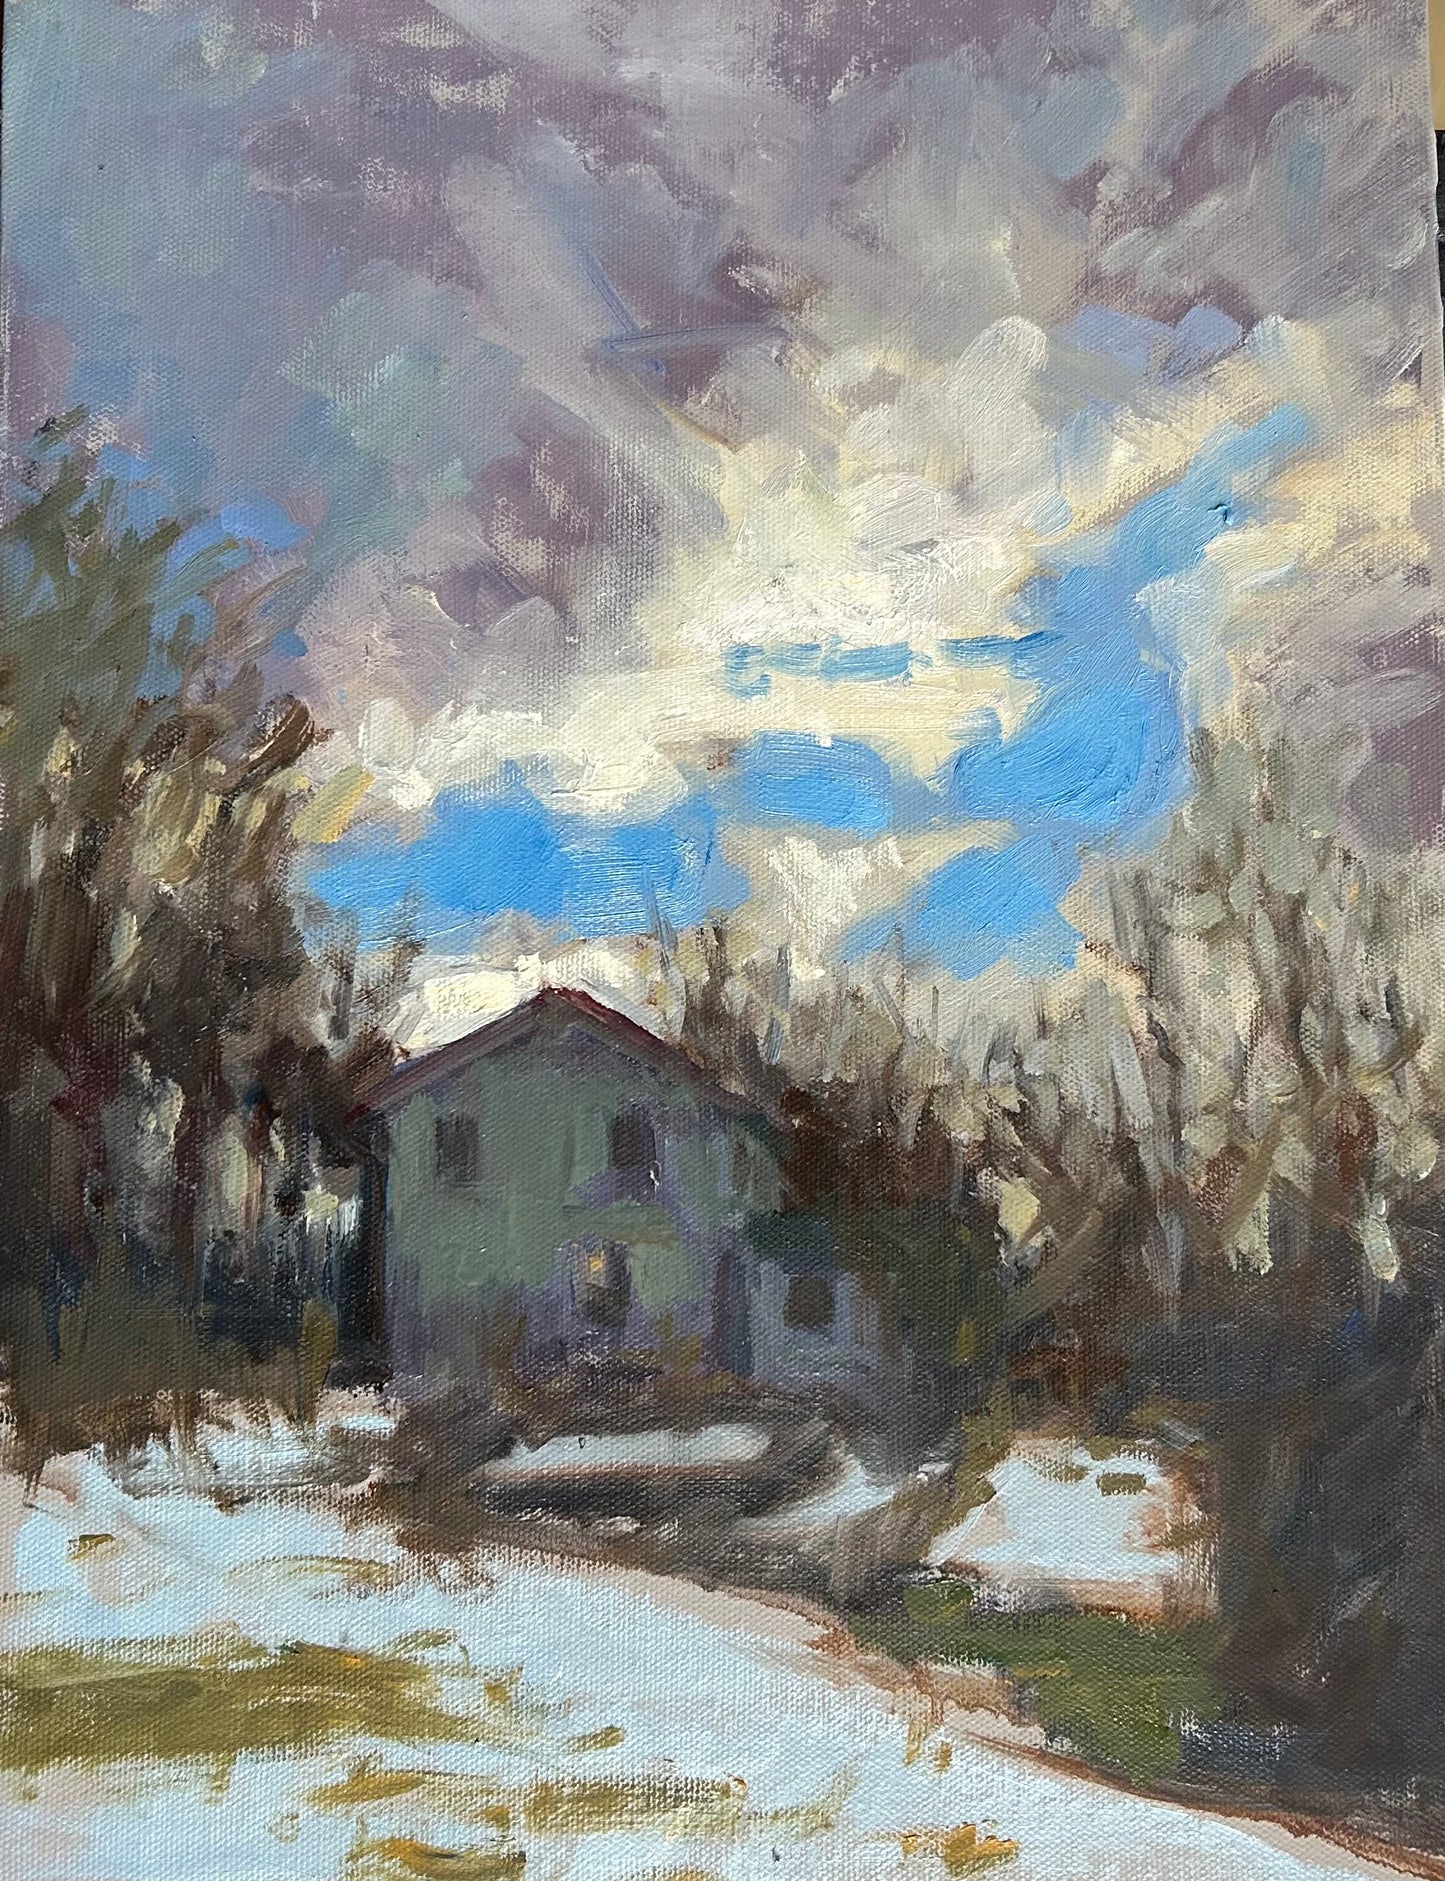 Melting Snow (16 x 12 Inches)